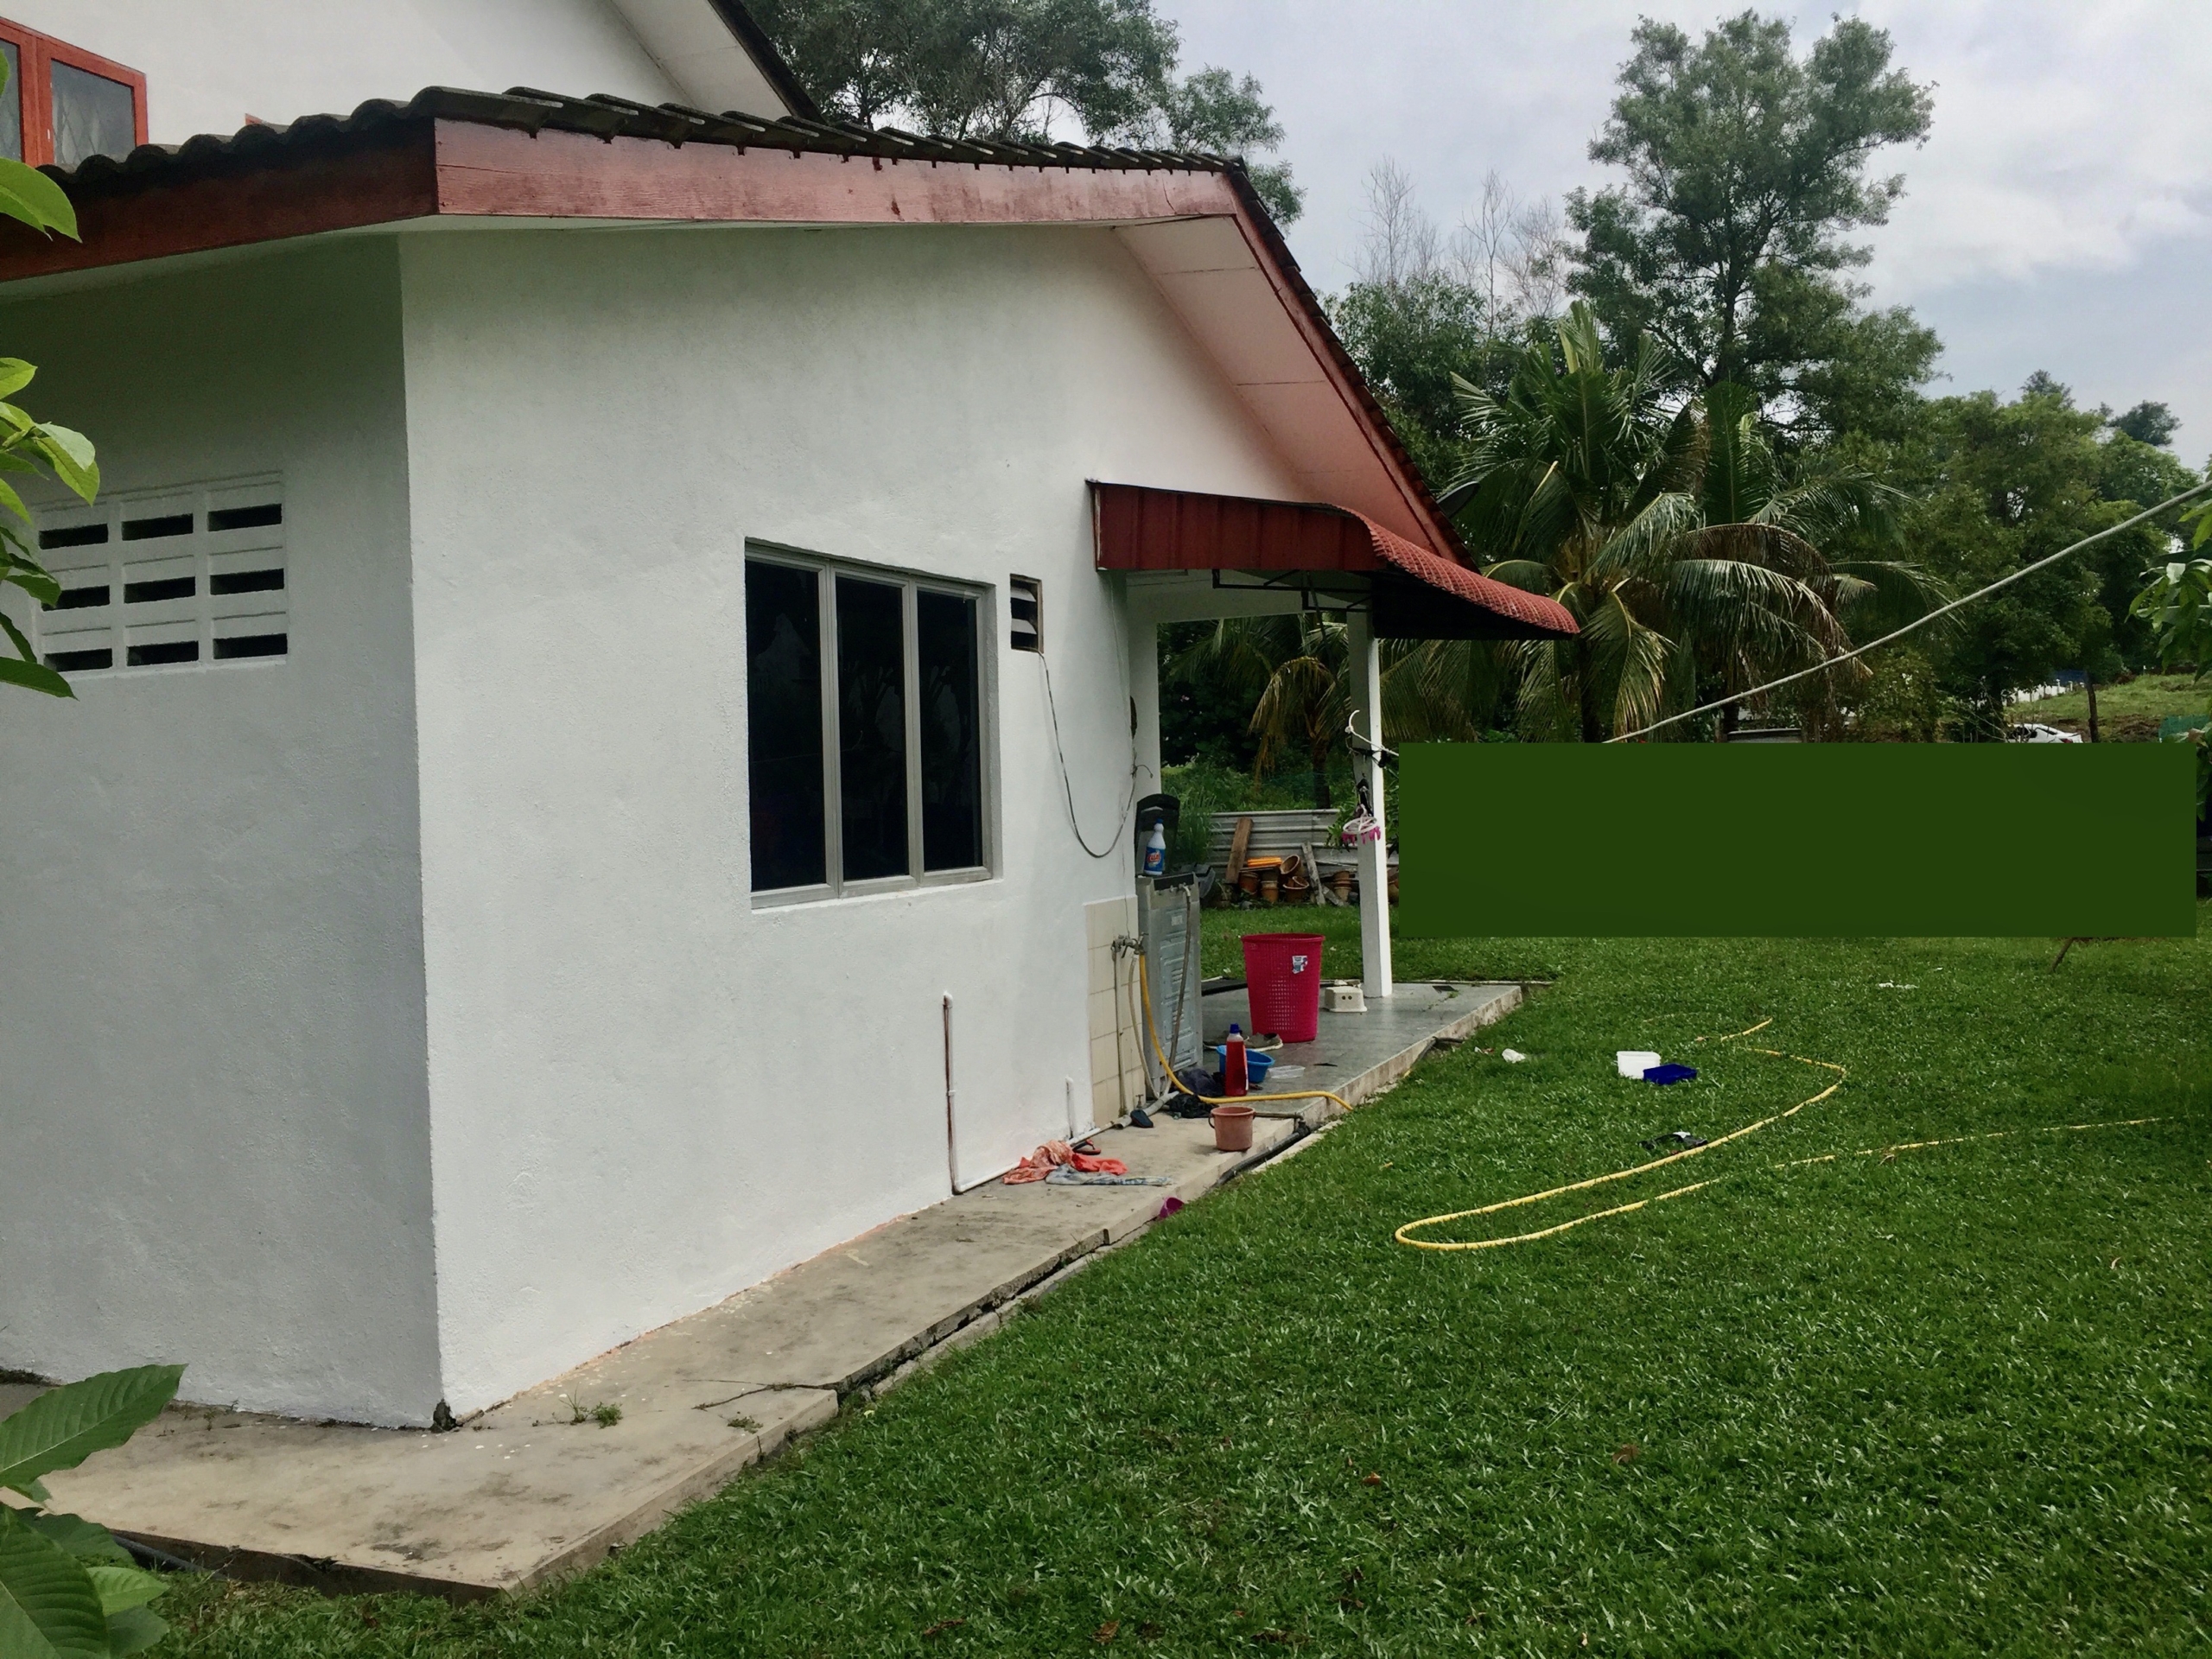 Bungalow House Section 6 Shah Alam for sale – Alam Harta Realty